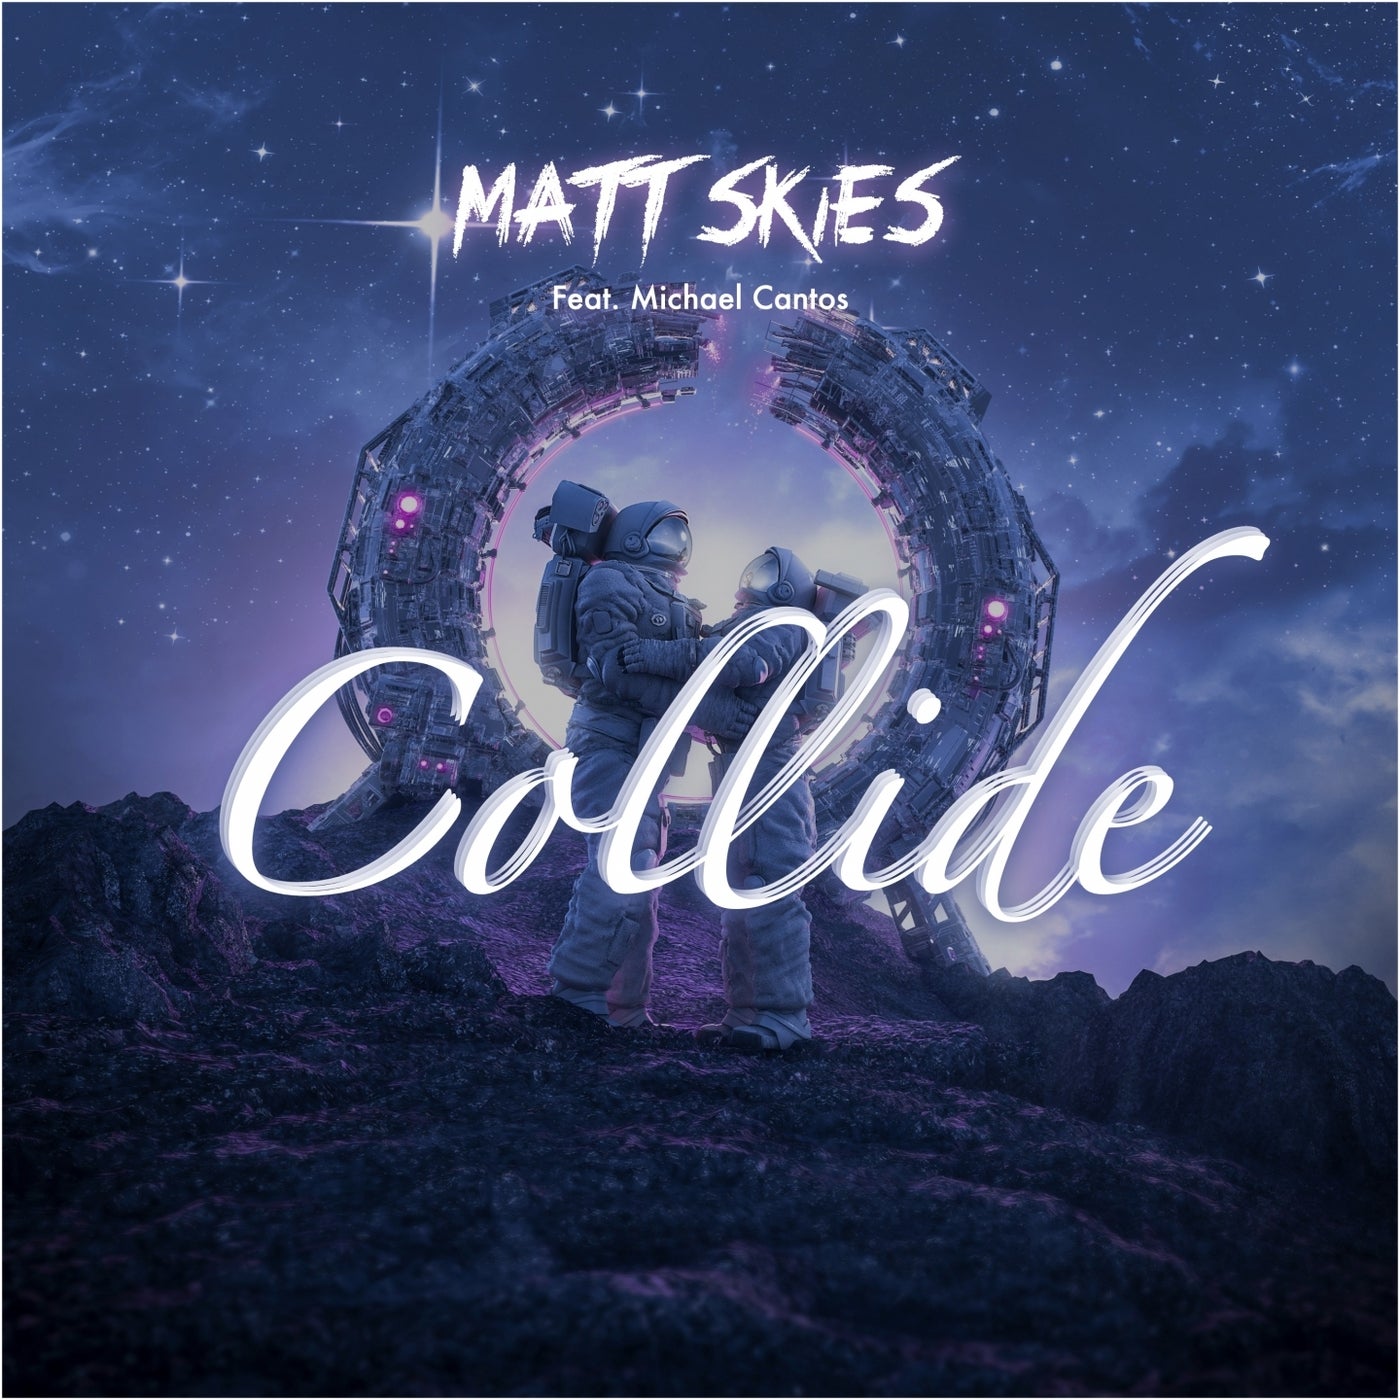 Collide (feat. Michael Cantos)